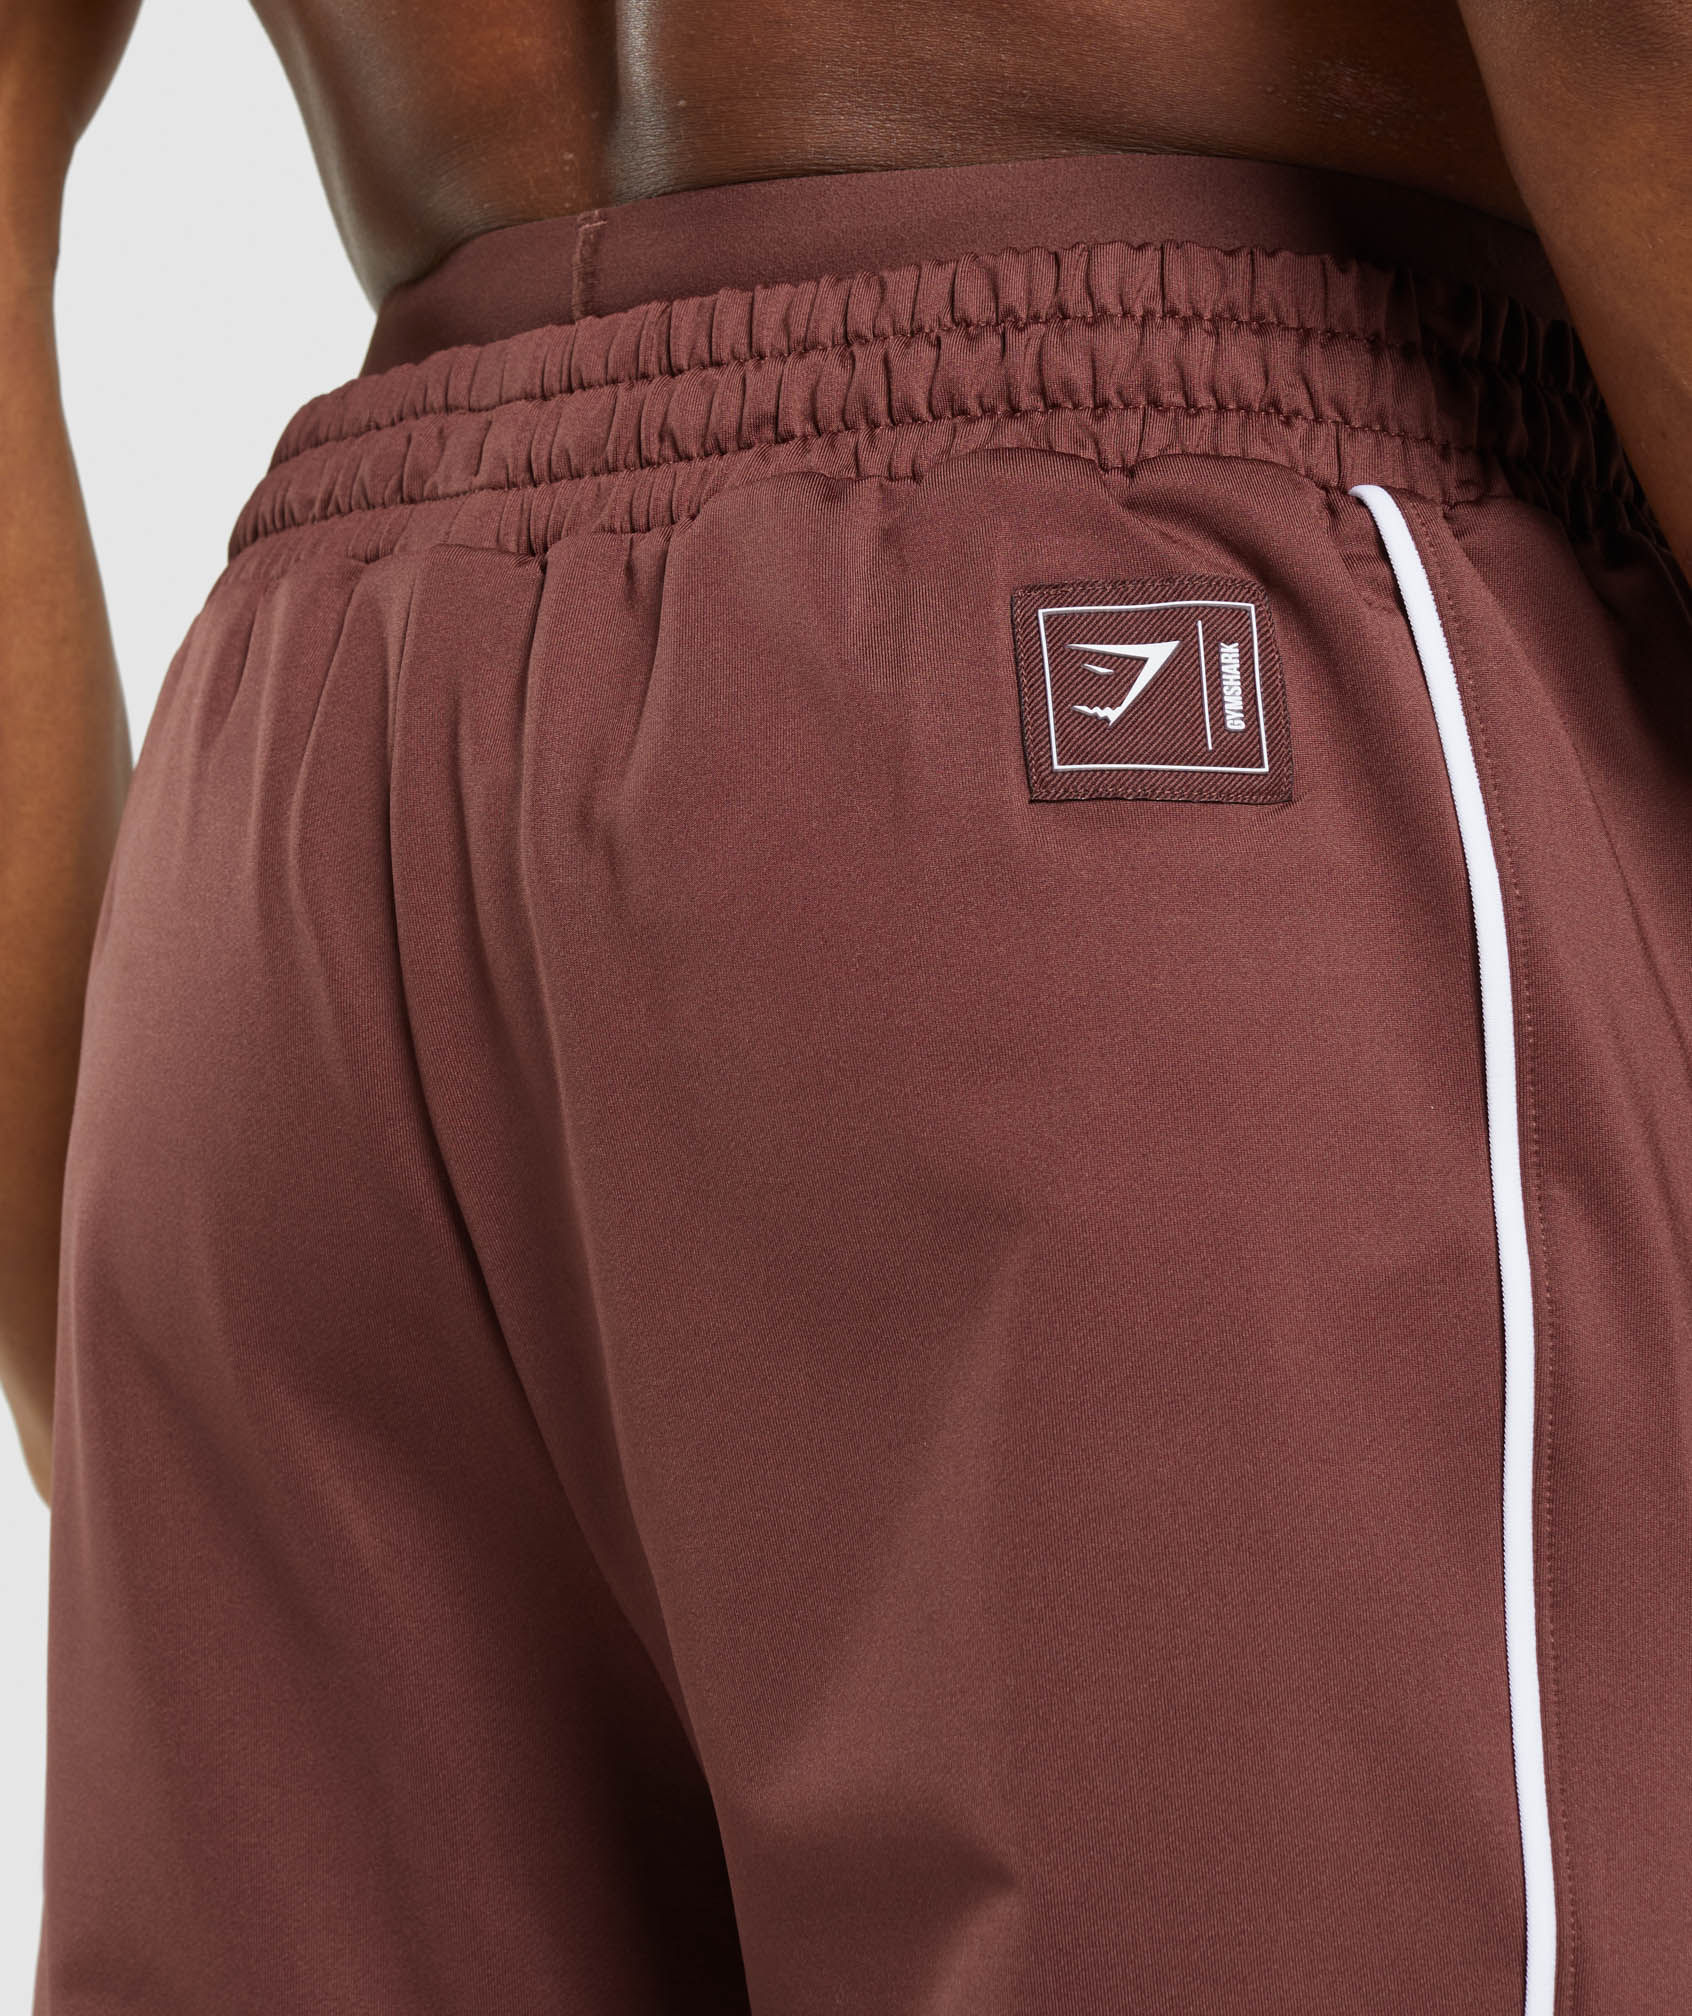 Recess Joggers in Cherry Brown/White - view 5